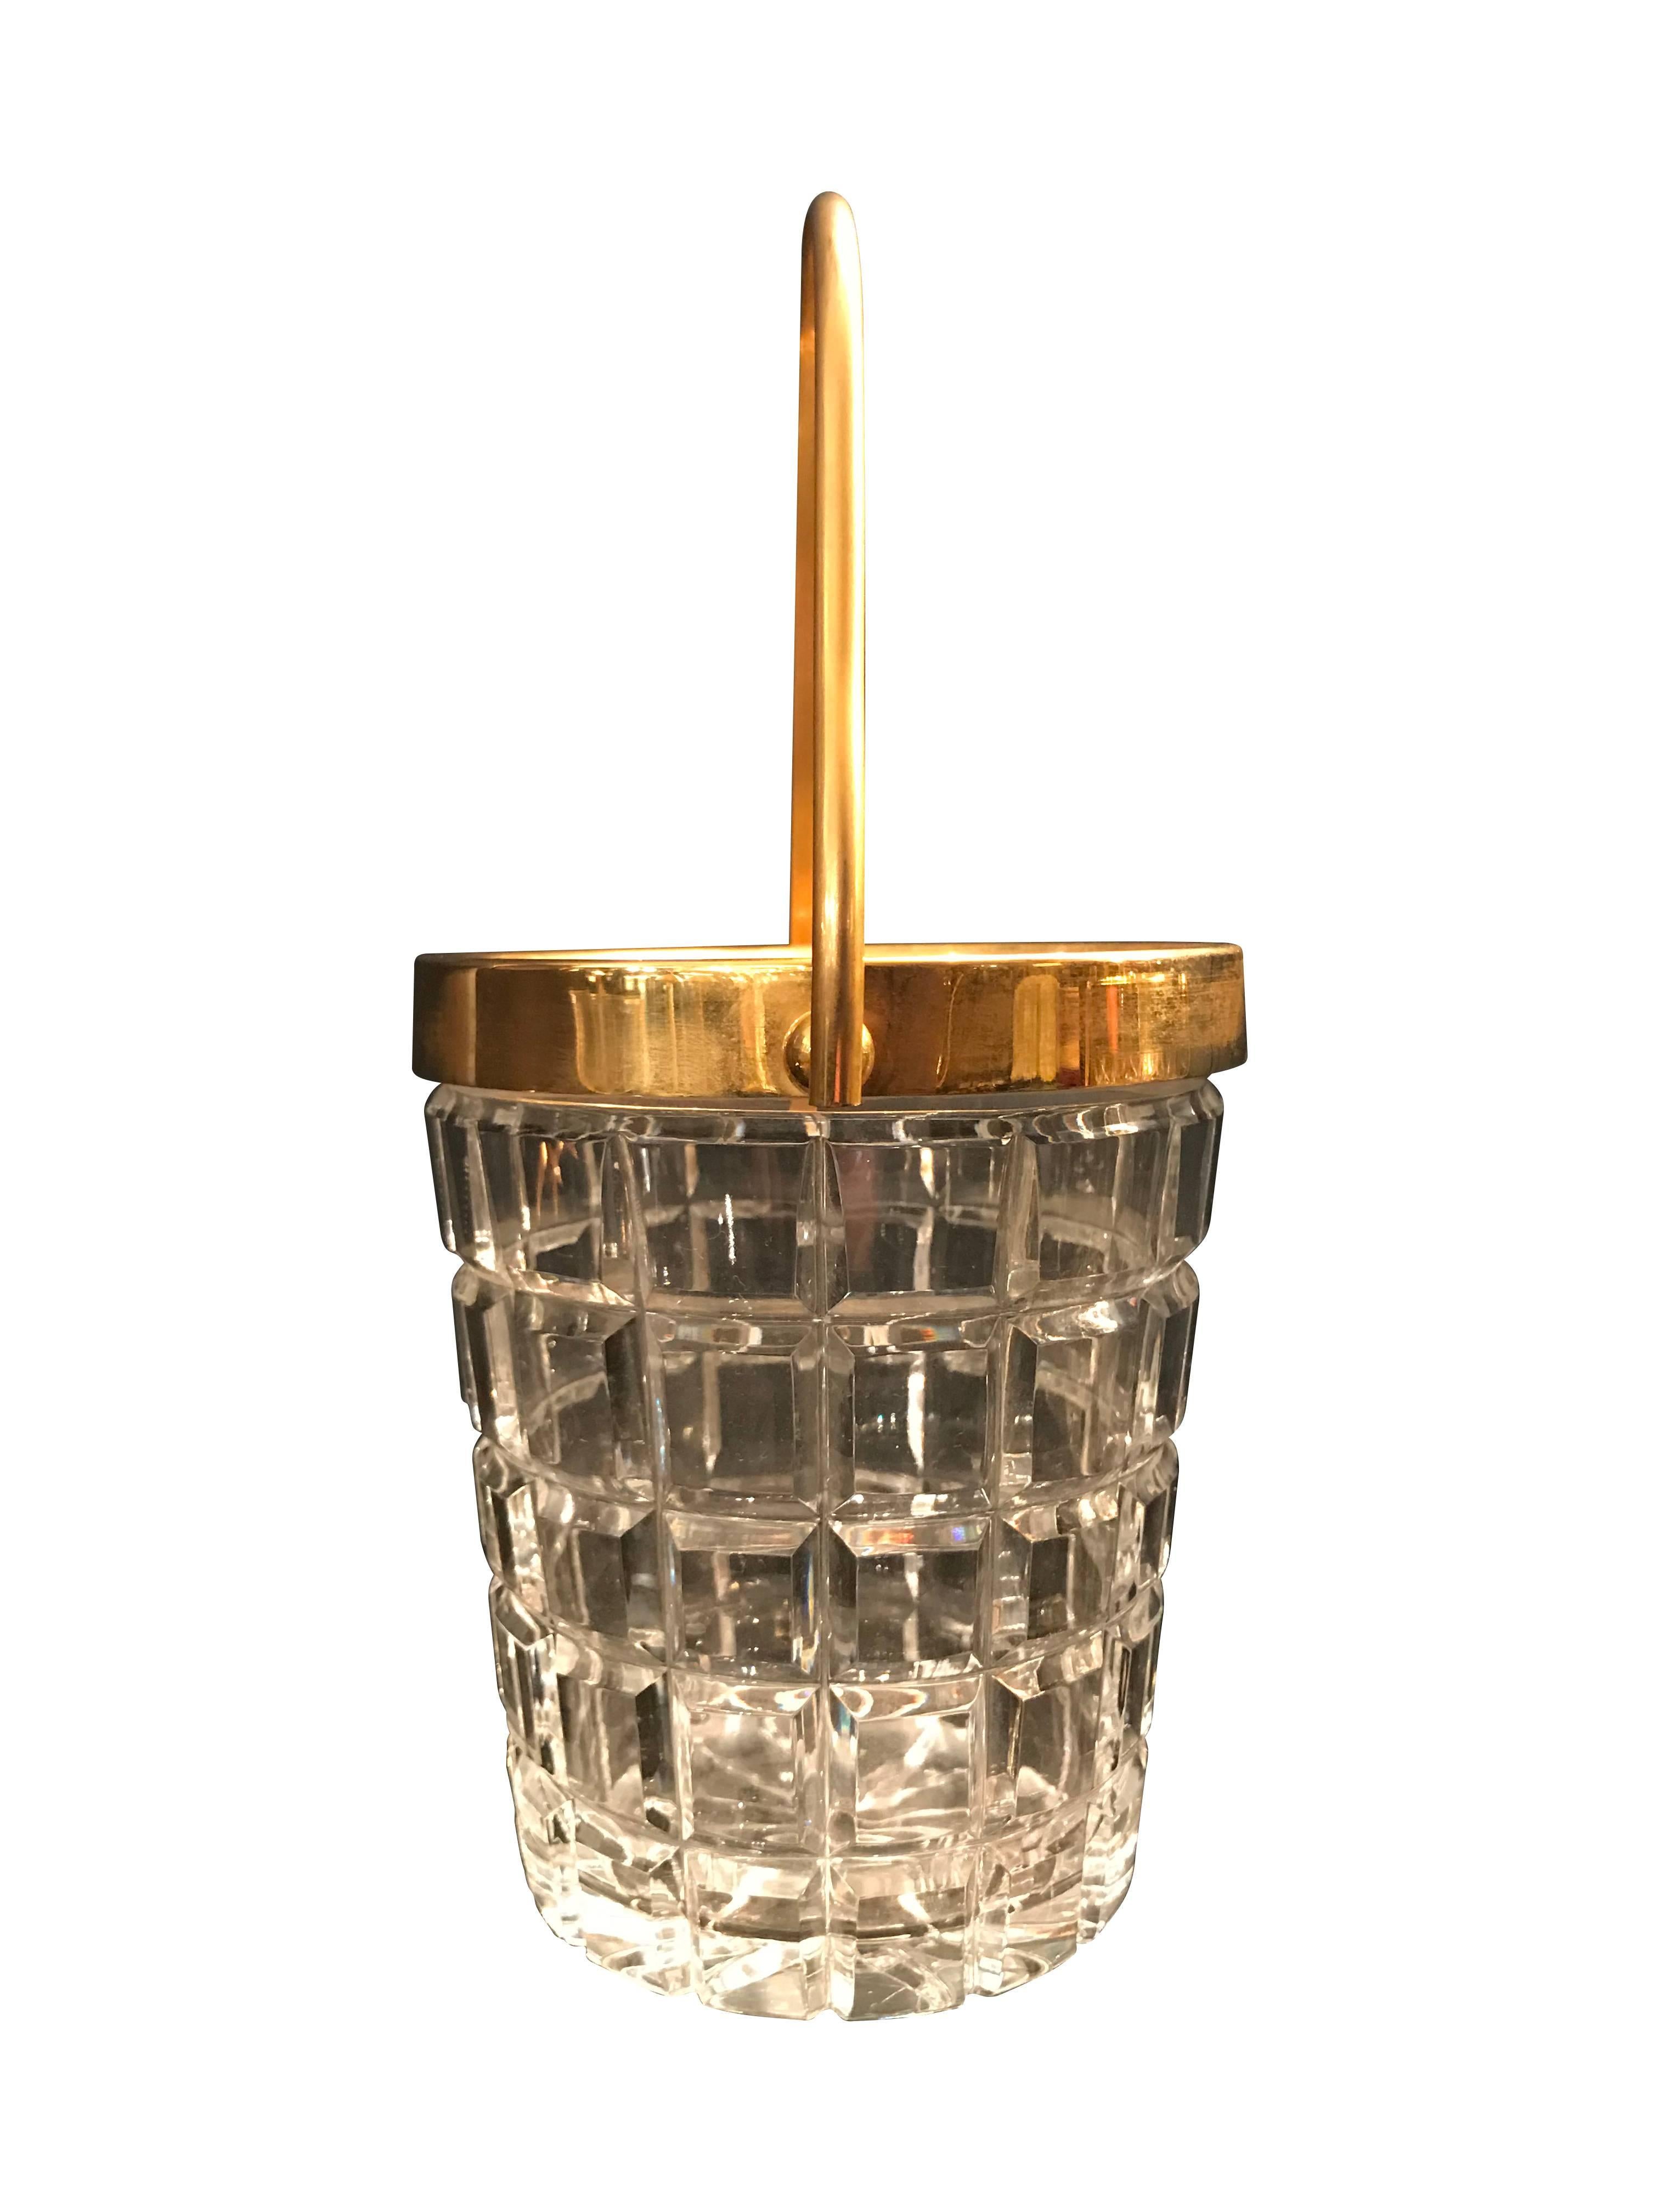 A Val St Lambert crystal ice bucket with gold leaf handle and rim.